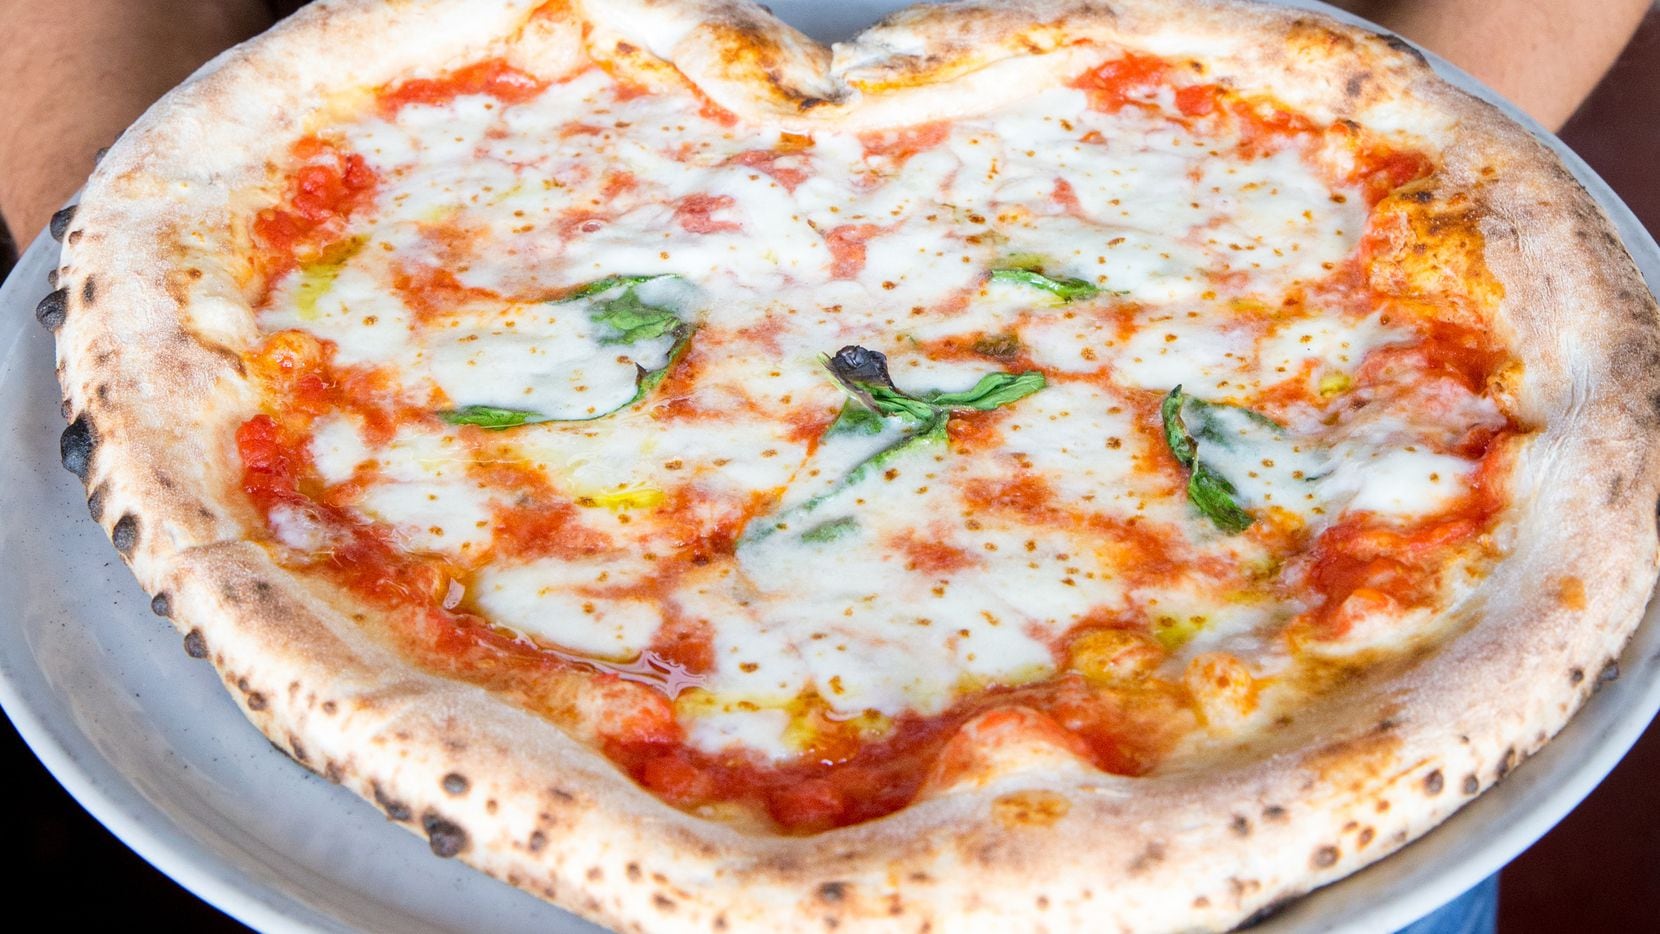 Cane Rosso and Zoli's in Dallas-Fort Worth sold heart-shaped pizzas this week. But not on...